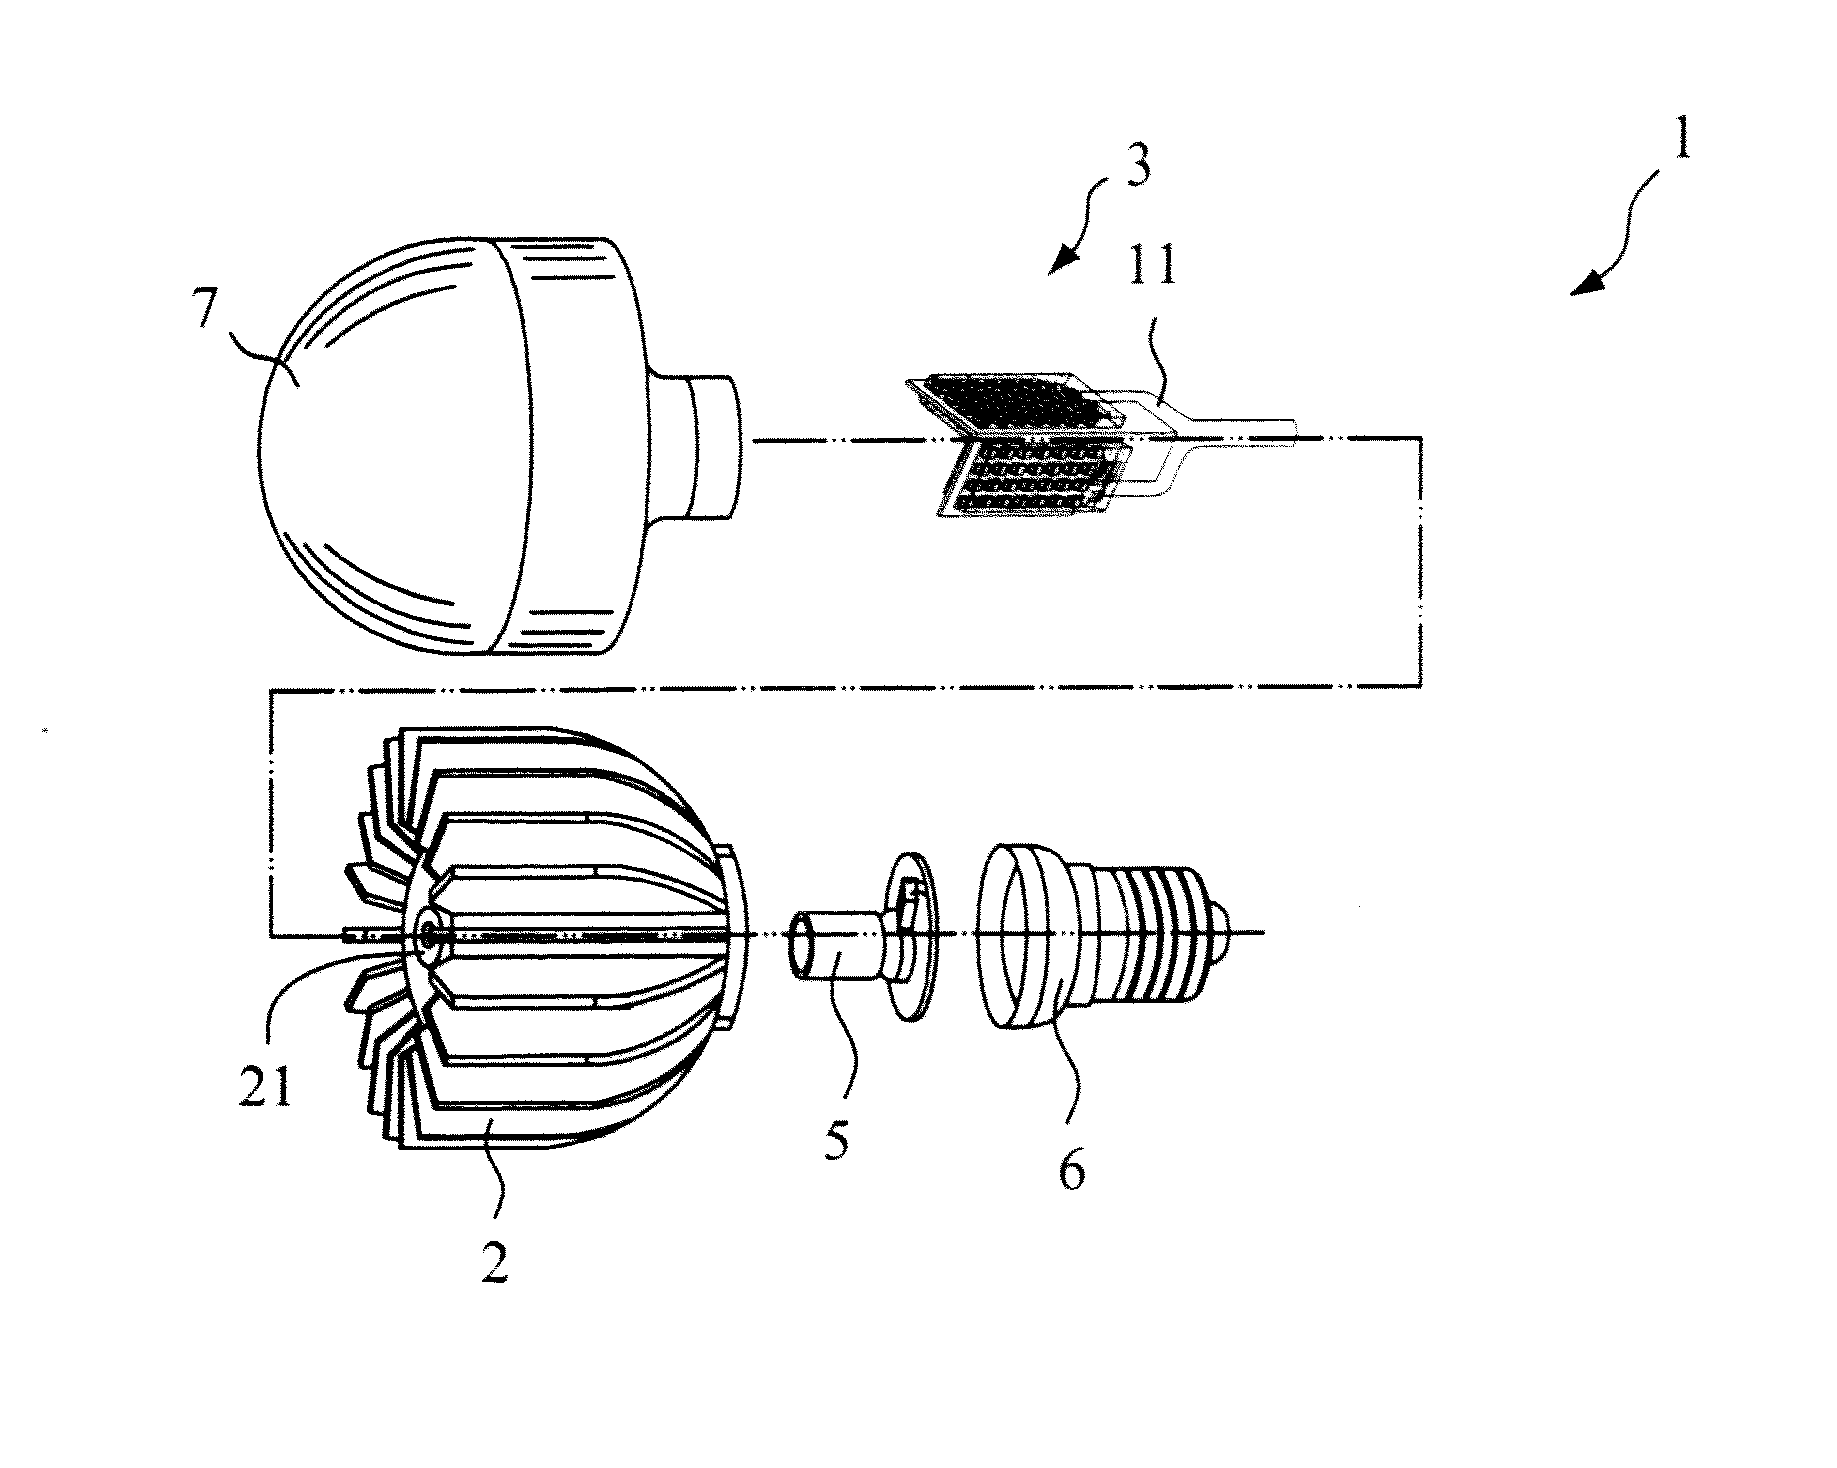 Light emitting package and LED bulb